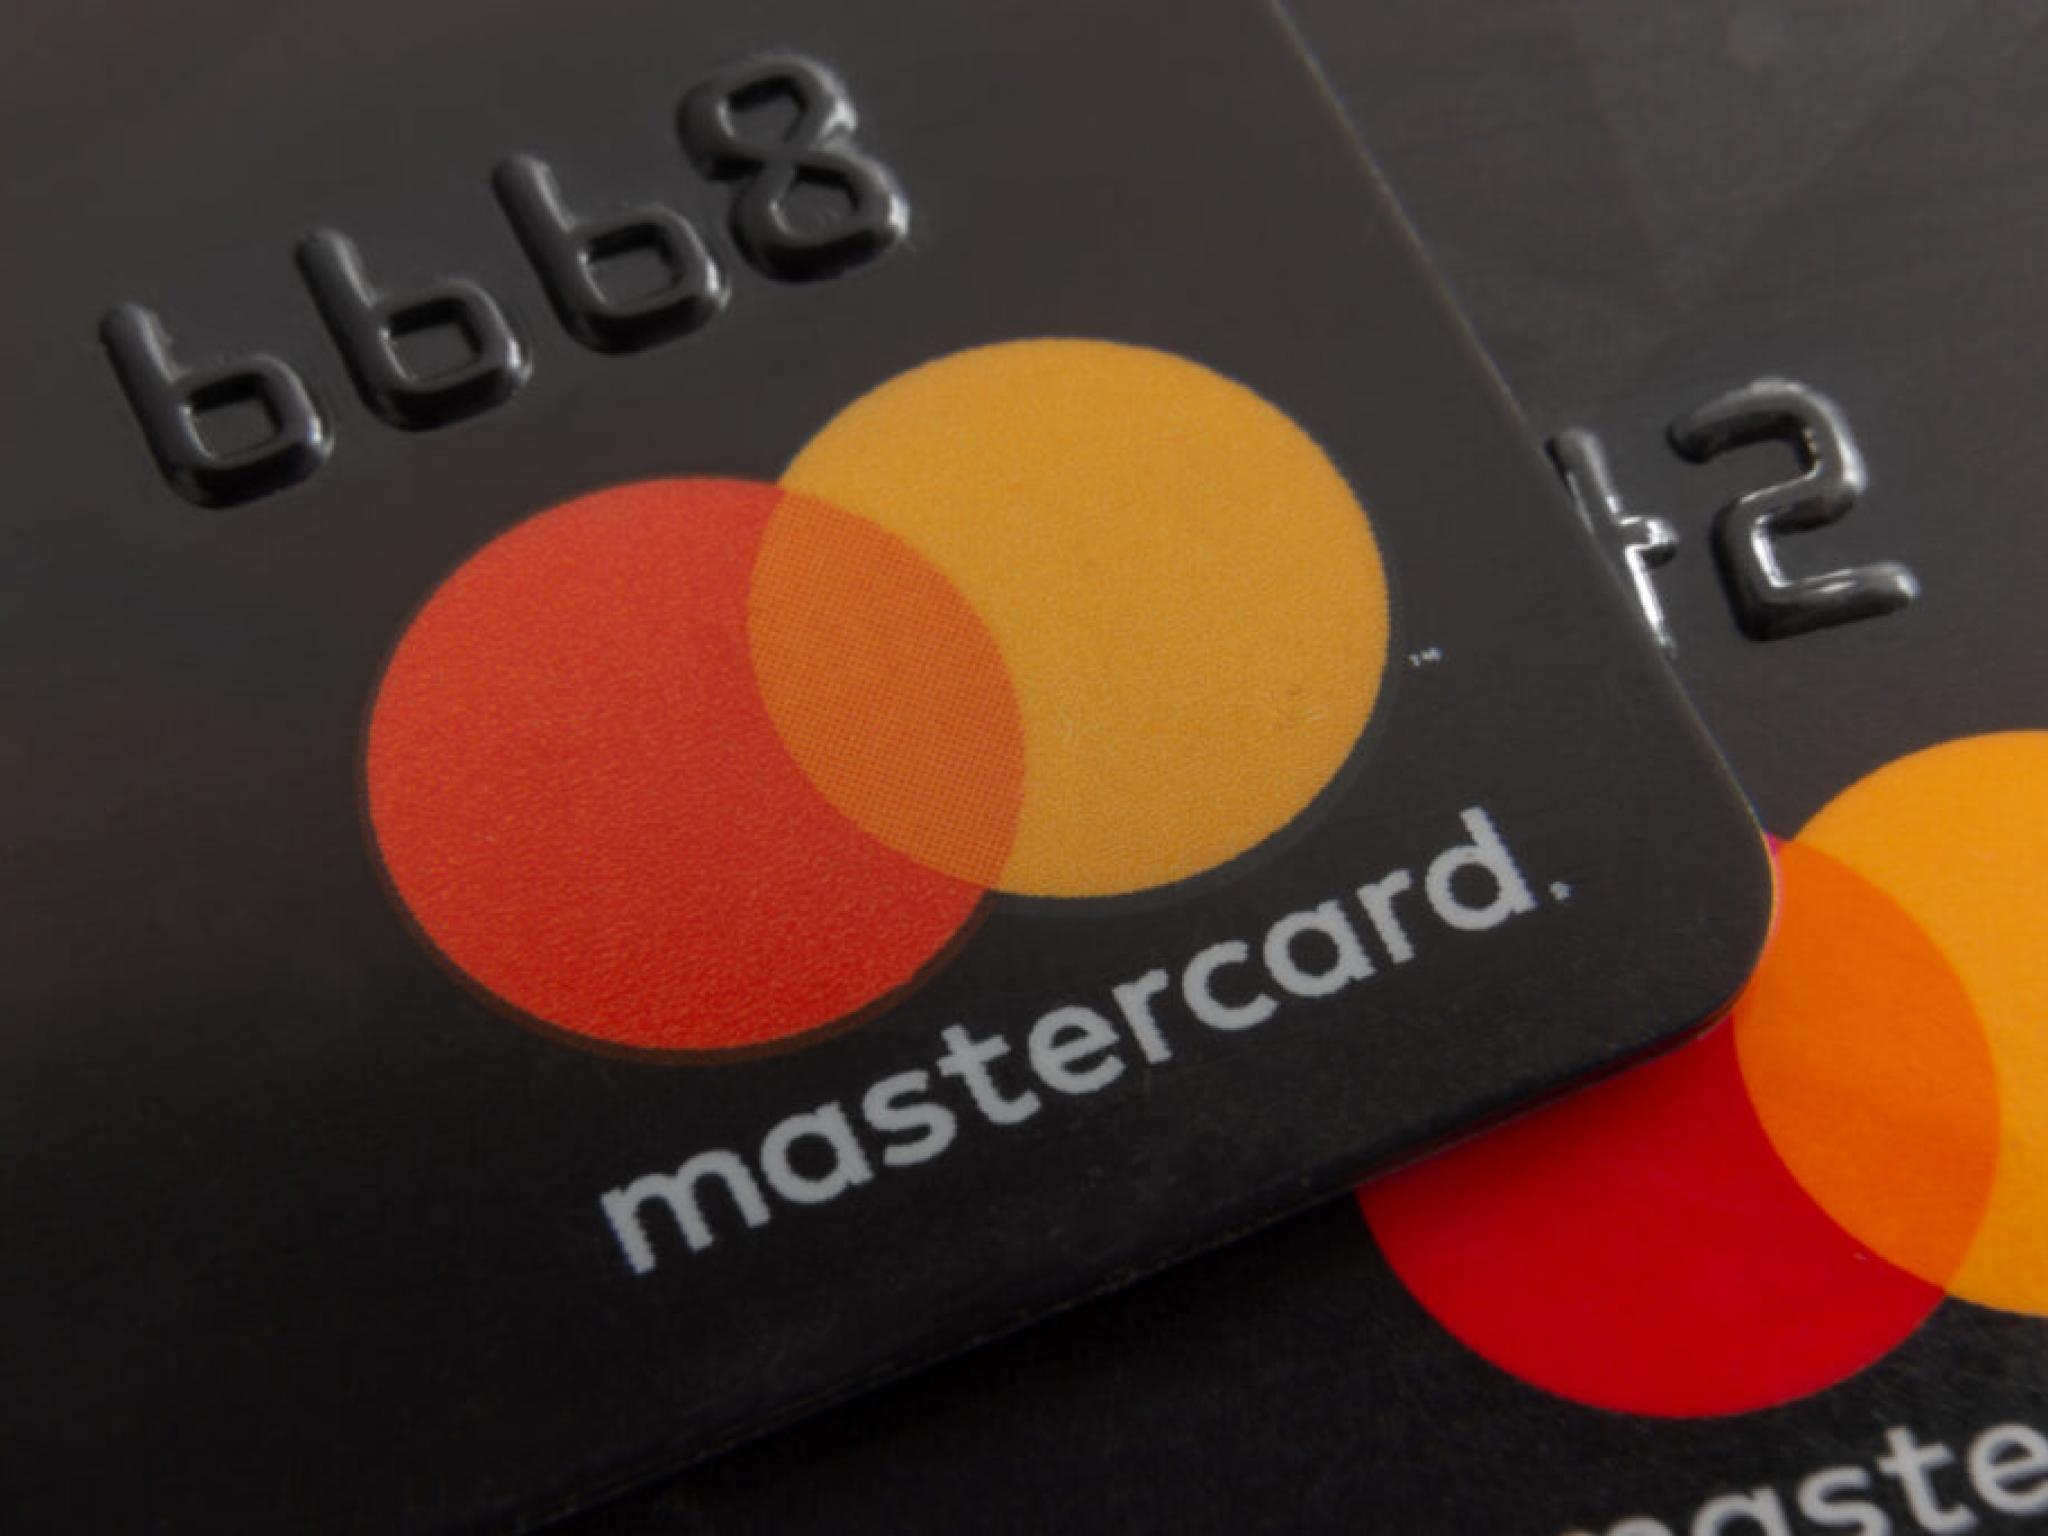  mastercard-looks-to-fight-cyber-threats-whats-going-on-with-credit-card-companys-shares-thursday 